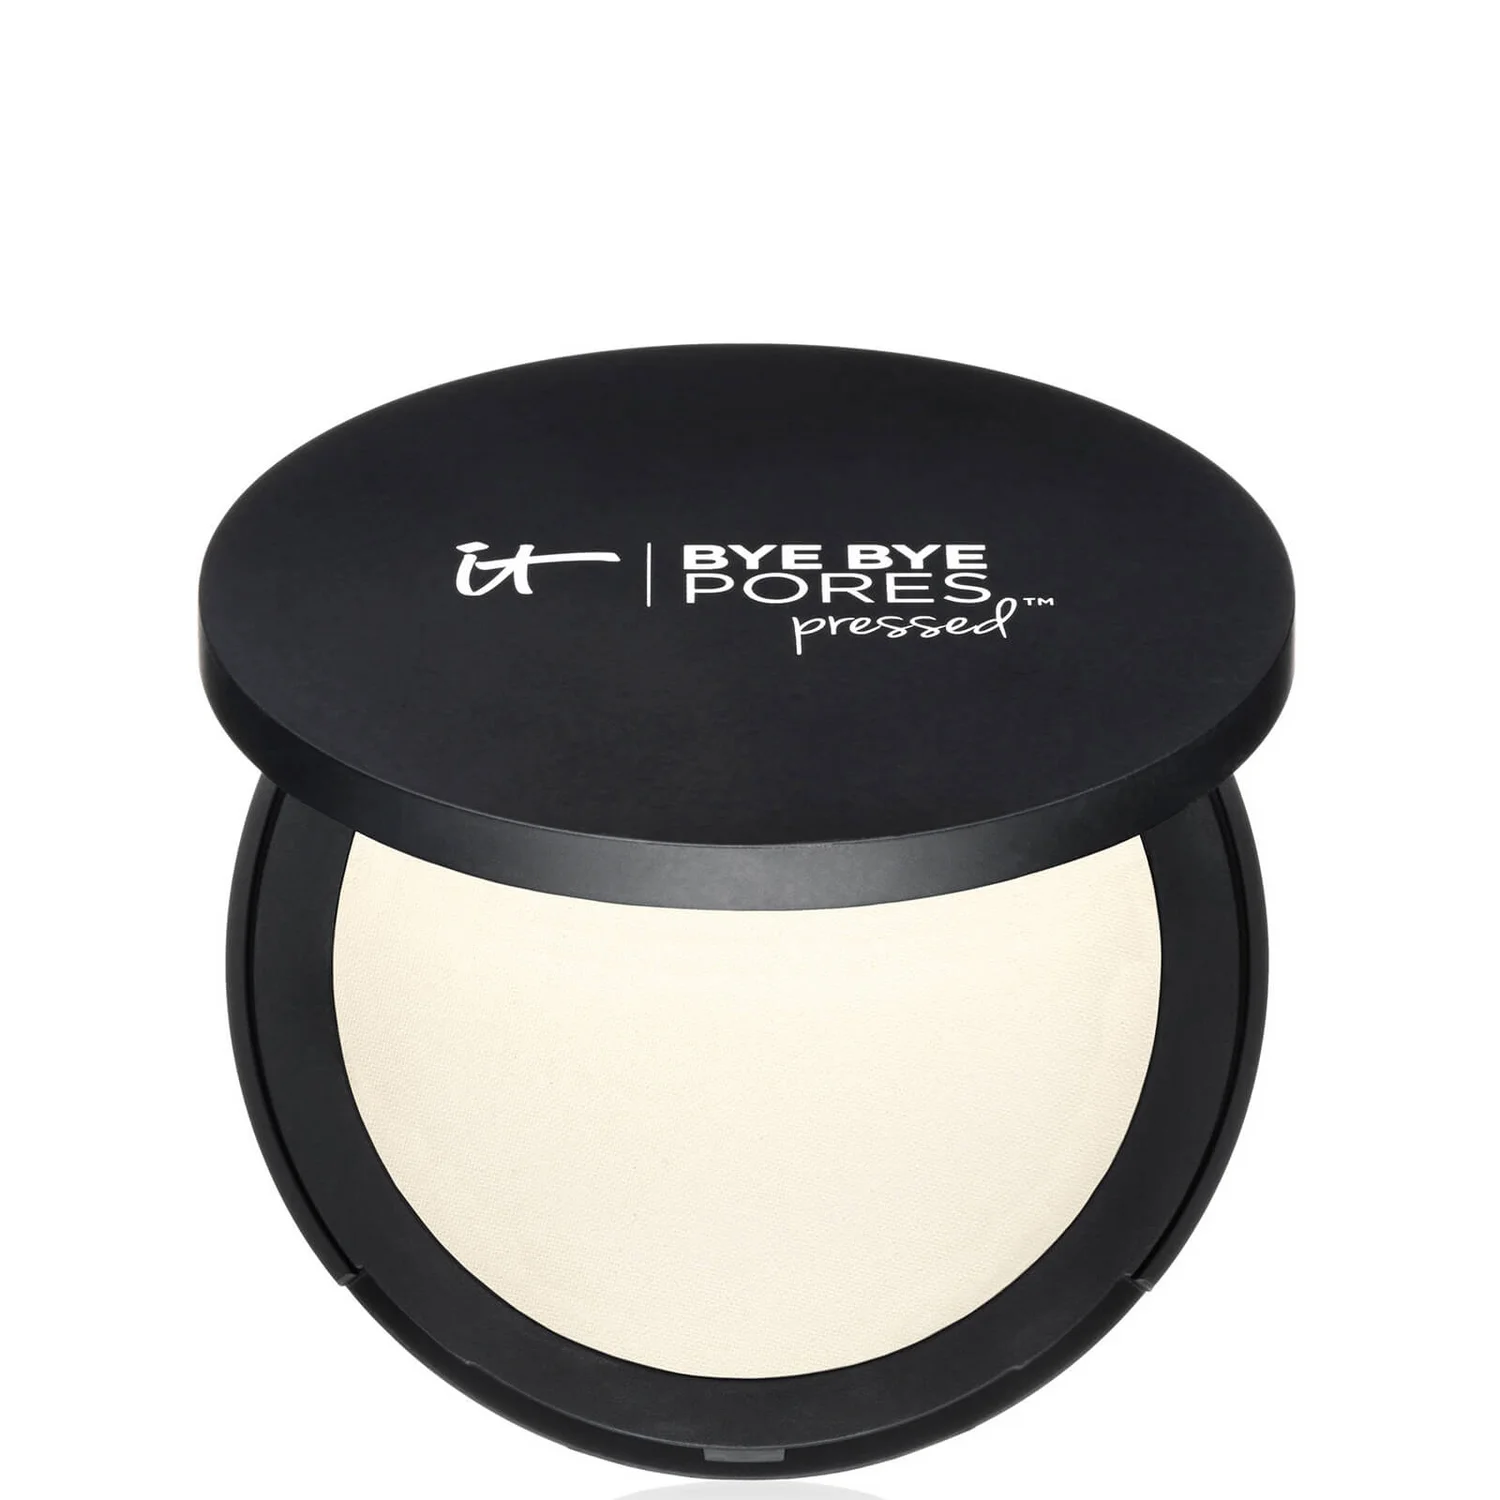 IT Cosmetics Bye Bye Pores Pressed Translucent Powder 9g (Various Shades) how to minimise reduce shrink cover pores naturally